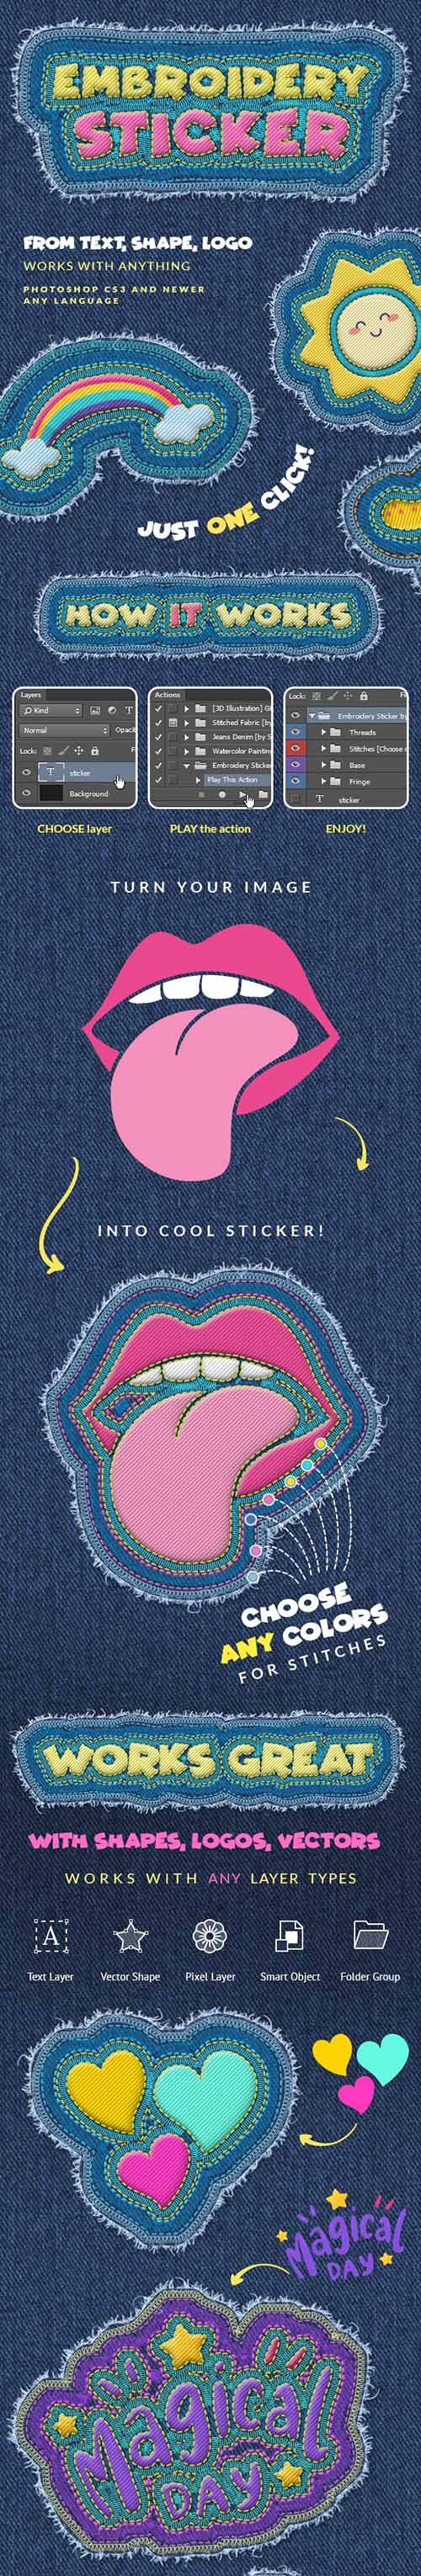 Embroidery Sticker - Photoshop Action 25804960